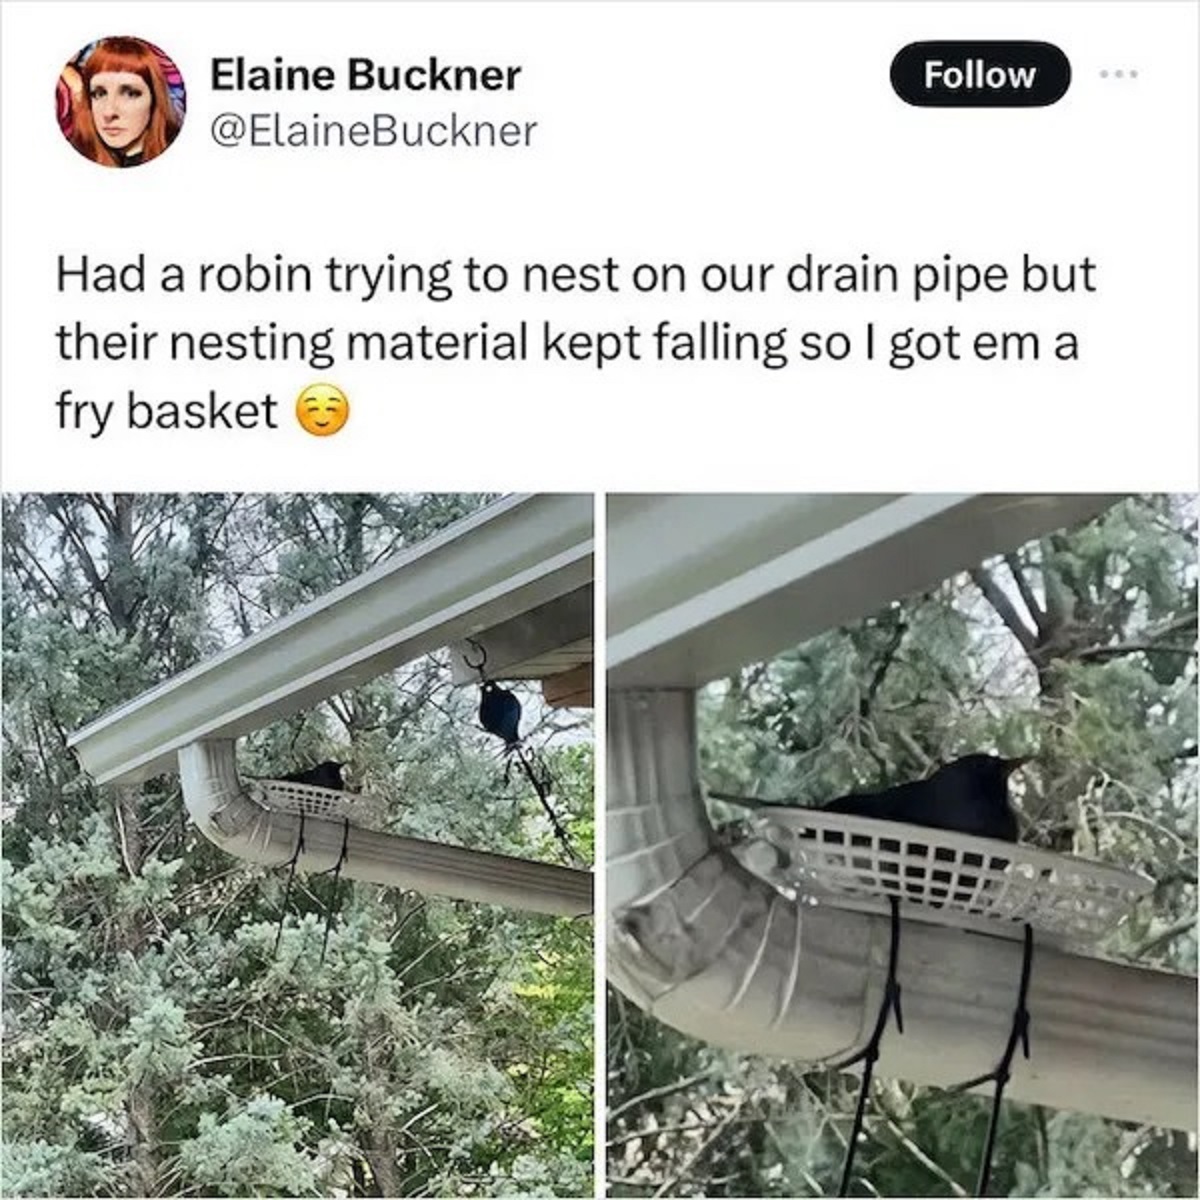 Internet meme - Elaine Buckner Had a robin trying to nest on our drain pipe but their nesting material kept falling so I got em a fry basket